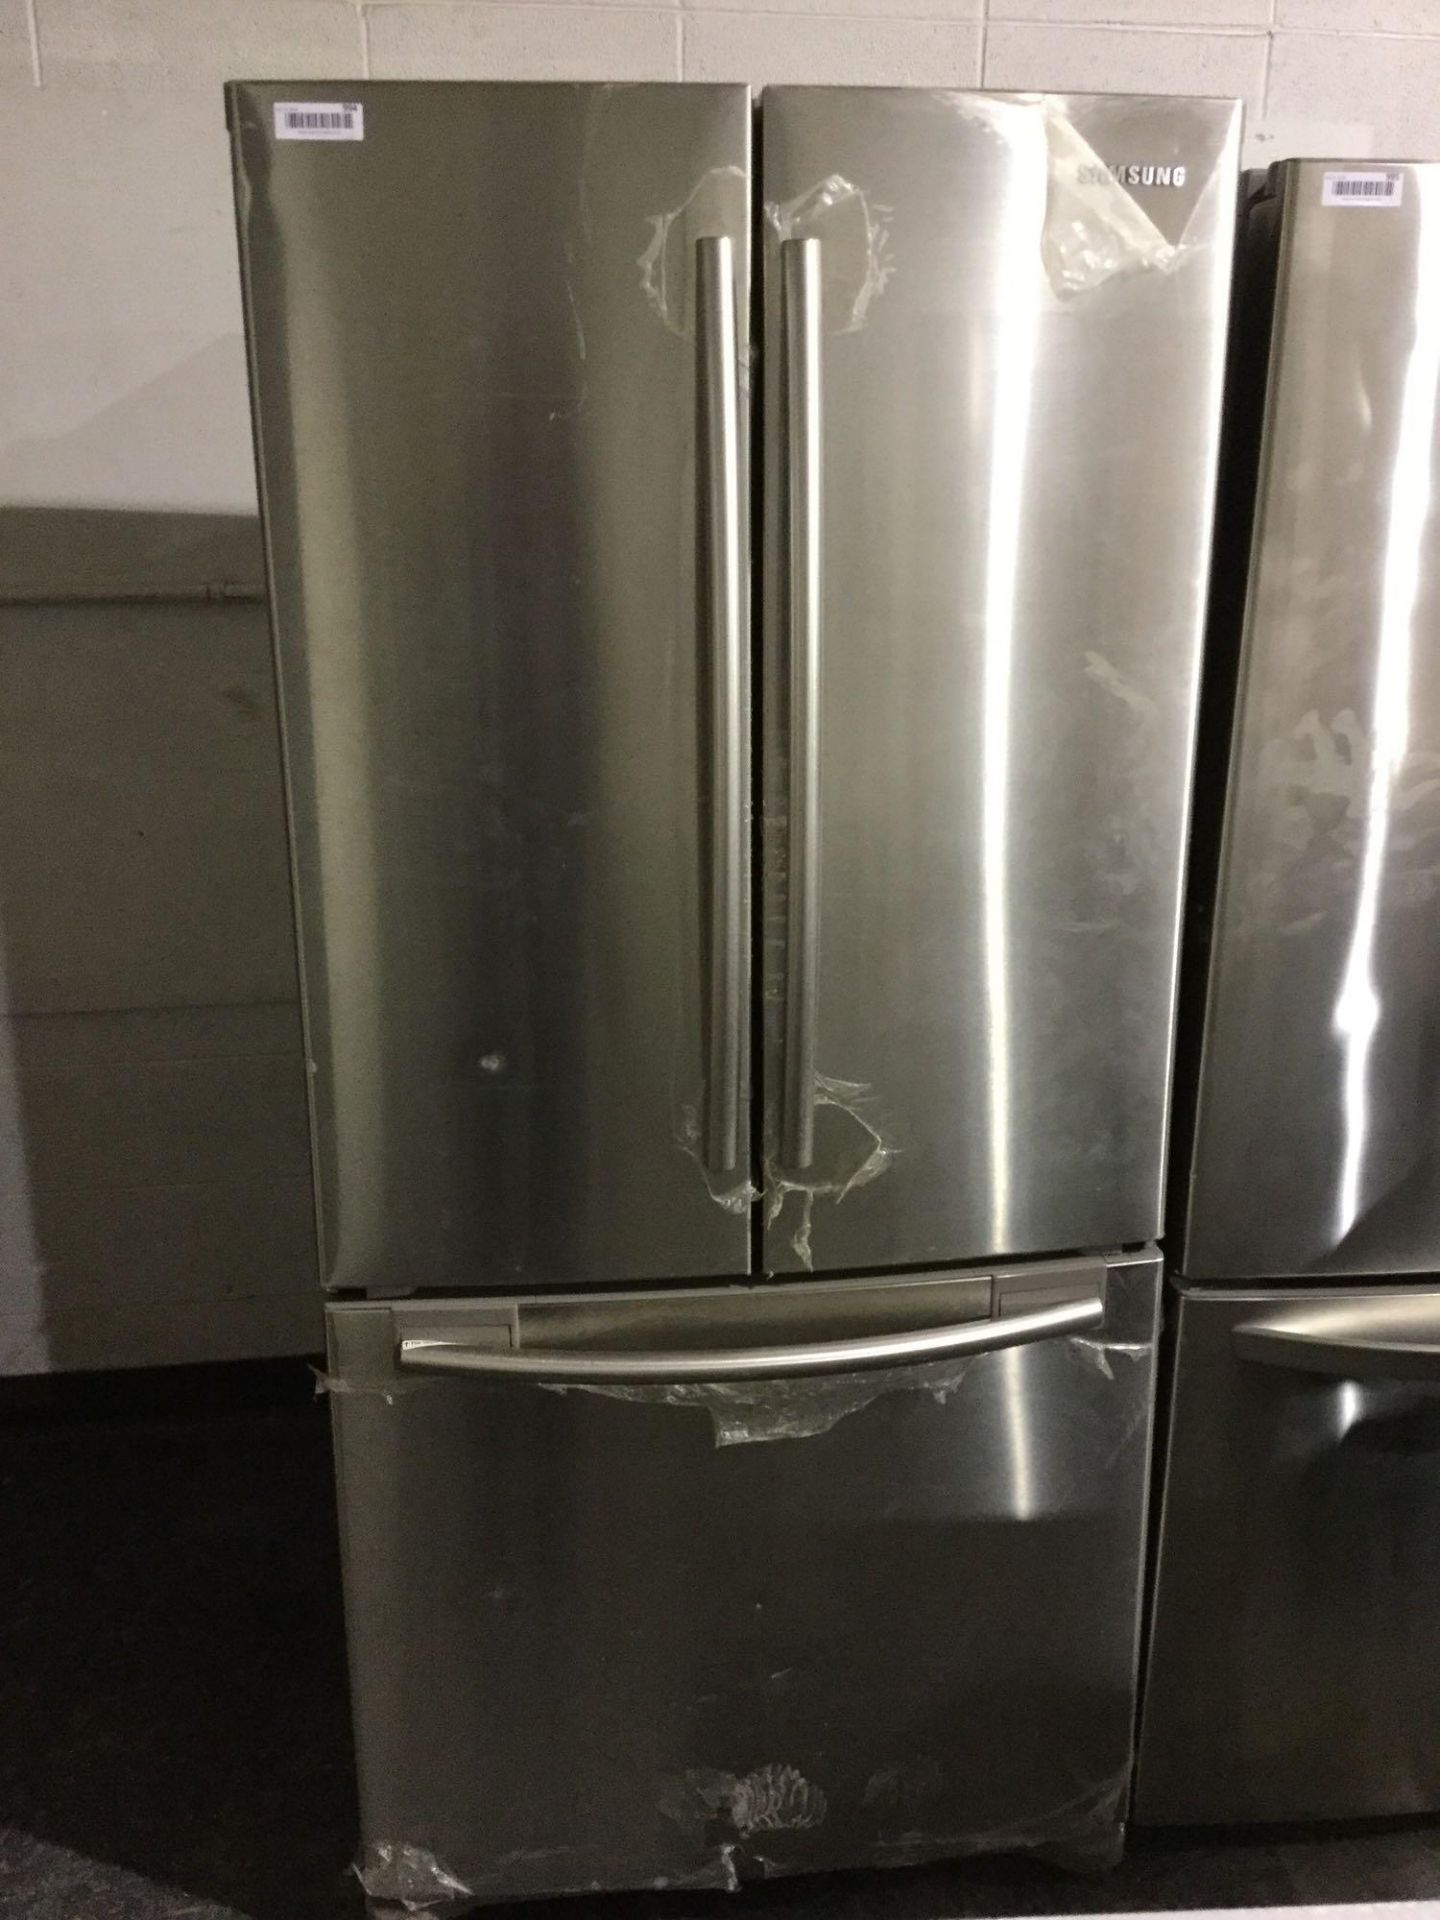 32" Samsung French Door Refrigerator with Single Ice Maker